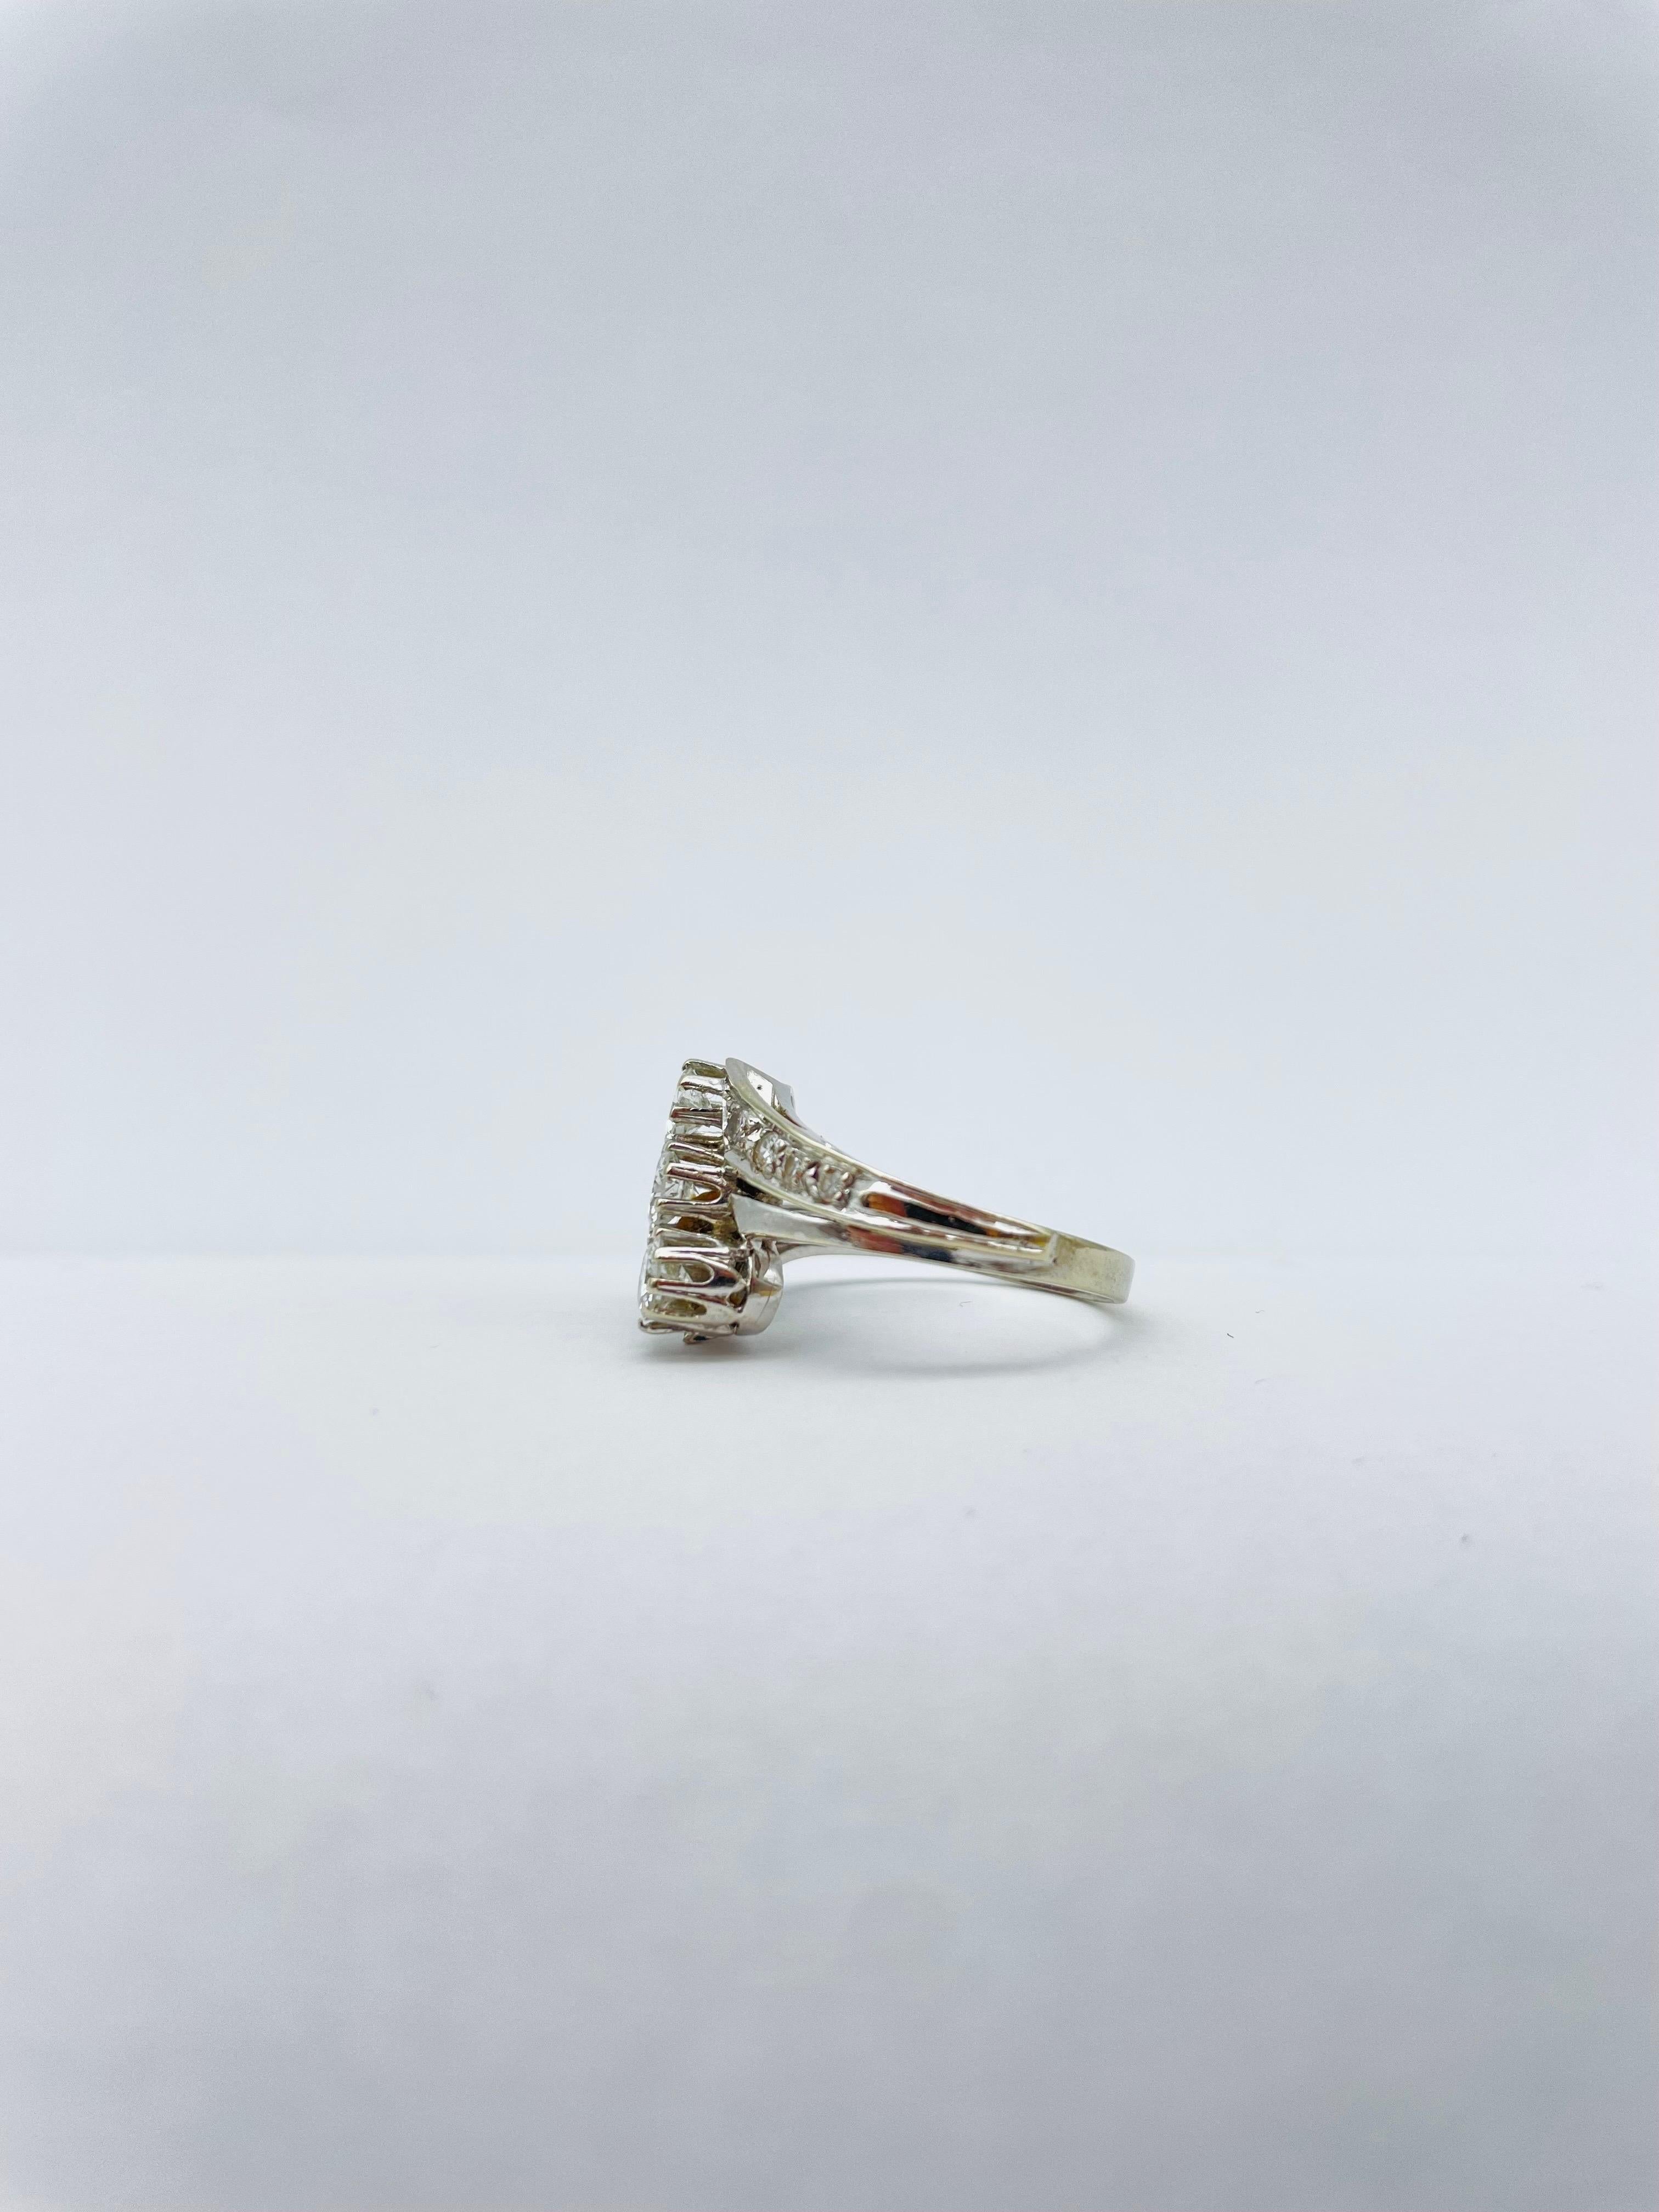 Magnificent 14k White Gold Ring with a Trio of Diamonds Each 0.25 Carat  For Sale 4